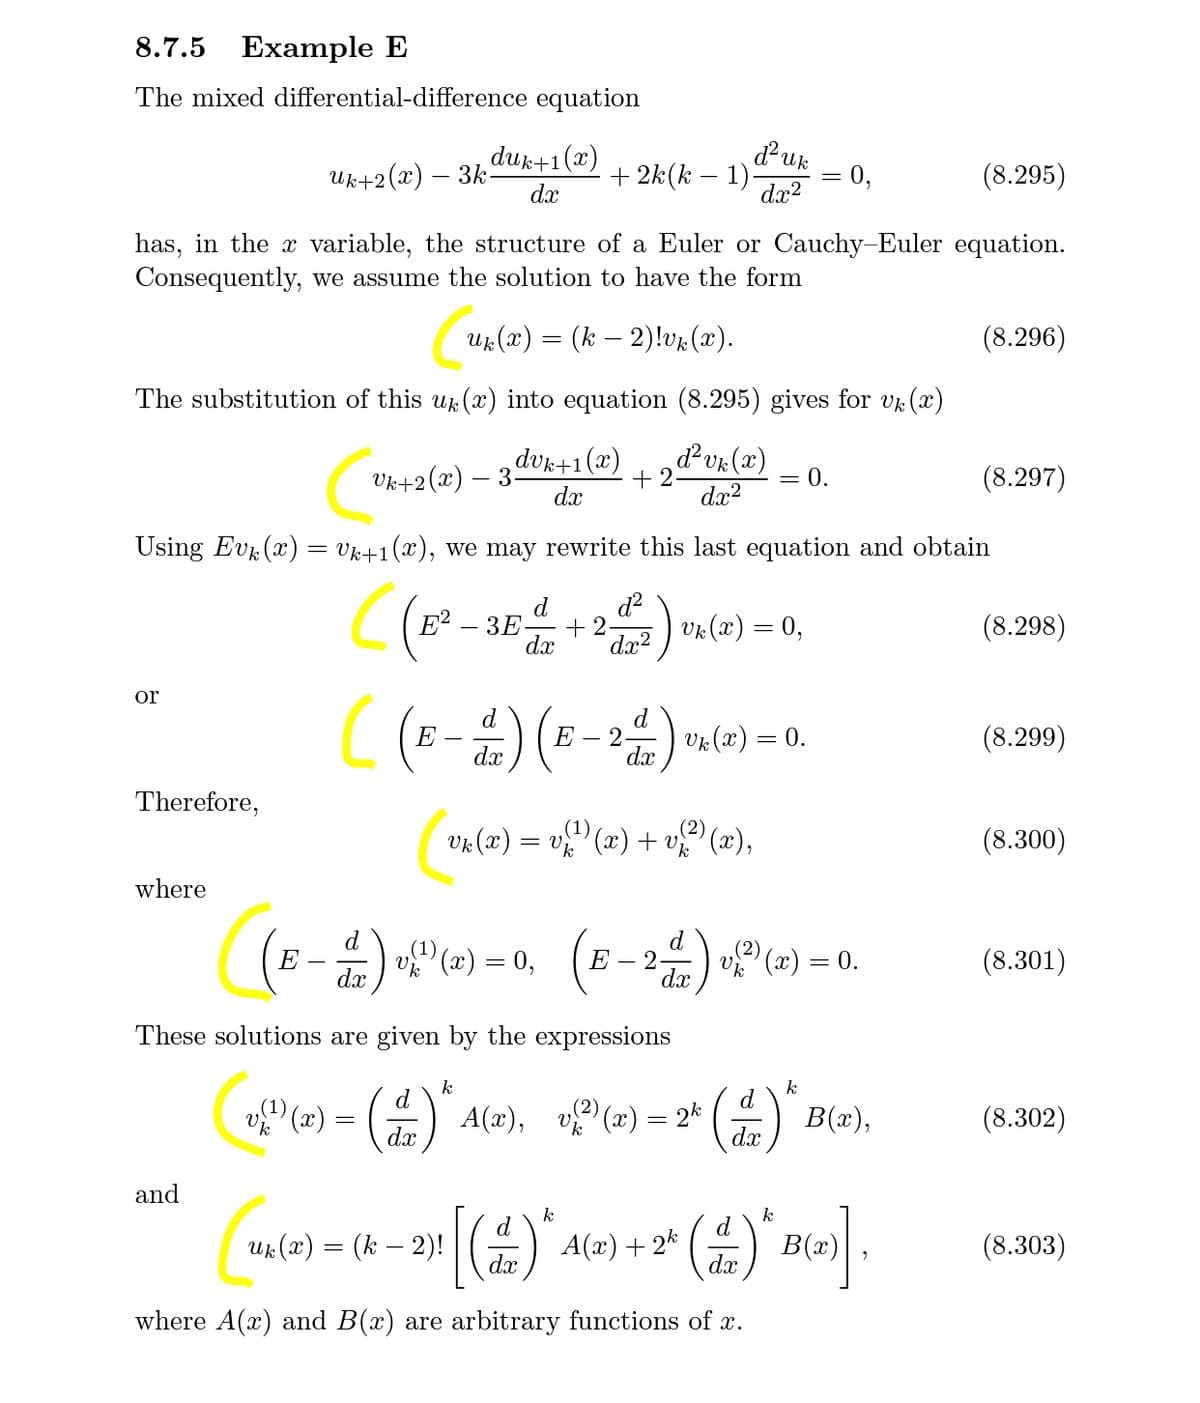 8.7.5 Example E
The mixed differential-difference equation
duk+1(x)
duk
Ик+2(г) — Зк-
dx
+ 2k(k – 1)
dx?
= 0,
(8.295)
has, in the x variable, the structure of a Euler or Cauchy-Euler equation.
Consequently, we assume the solution to have the form
Ux (x) = (k – 2)!vx(x).
(8.296)
The substitution of this u (x) into equation (8.295) gives for vk (x)
Uk+2(x) – 3dek+1(2) + 2&vx(x) ,
dx?
Vk+2(x) – 3-
dx
dvr(2)
= 0.
(8.297)
Using Evr (x) = Vk+1(x), we may rewrite this last equation and obtain
C(E? - 3E + 2)
d?
Vr (x) = 0,
d.
(8.298)
dx²
or
)(
d
d
- 2) vr (a) = 0.
(8.299)
E
E
dx
dx
Therefore,
(2)
Va (x) = v" (x) + v (x),
(1)
(8.300)
where
d
d
E) »P (2) = 0, (E - 2 (=) = 0.
(1)
v" (x)
dx
(8.301)
E
= 0.
dx
These solutions are given by the expressions
k
d
k
d.
v (2) =
- (유) A(2), 맛이(2) -안 () B(2),
В(),
(8.302)
dx
dx
and
[(4)°
k
Uk (x) = (k – 2)!
A(x) + 2k
k
d
B(x)
(8.303)
dx
dx
where A(x) and B(x) are arbitrary functions of x.
